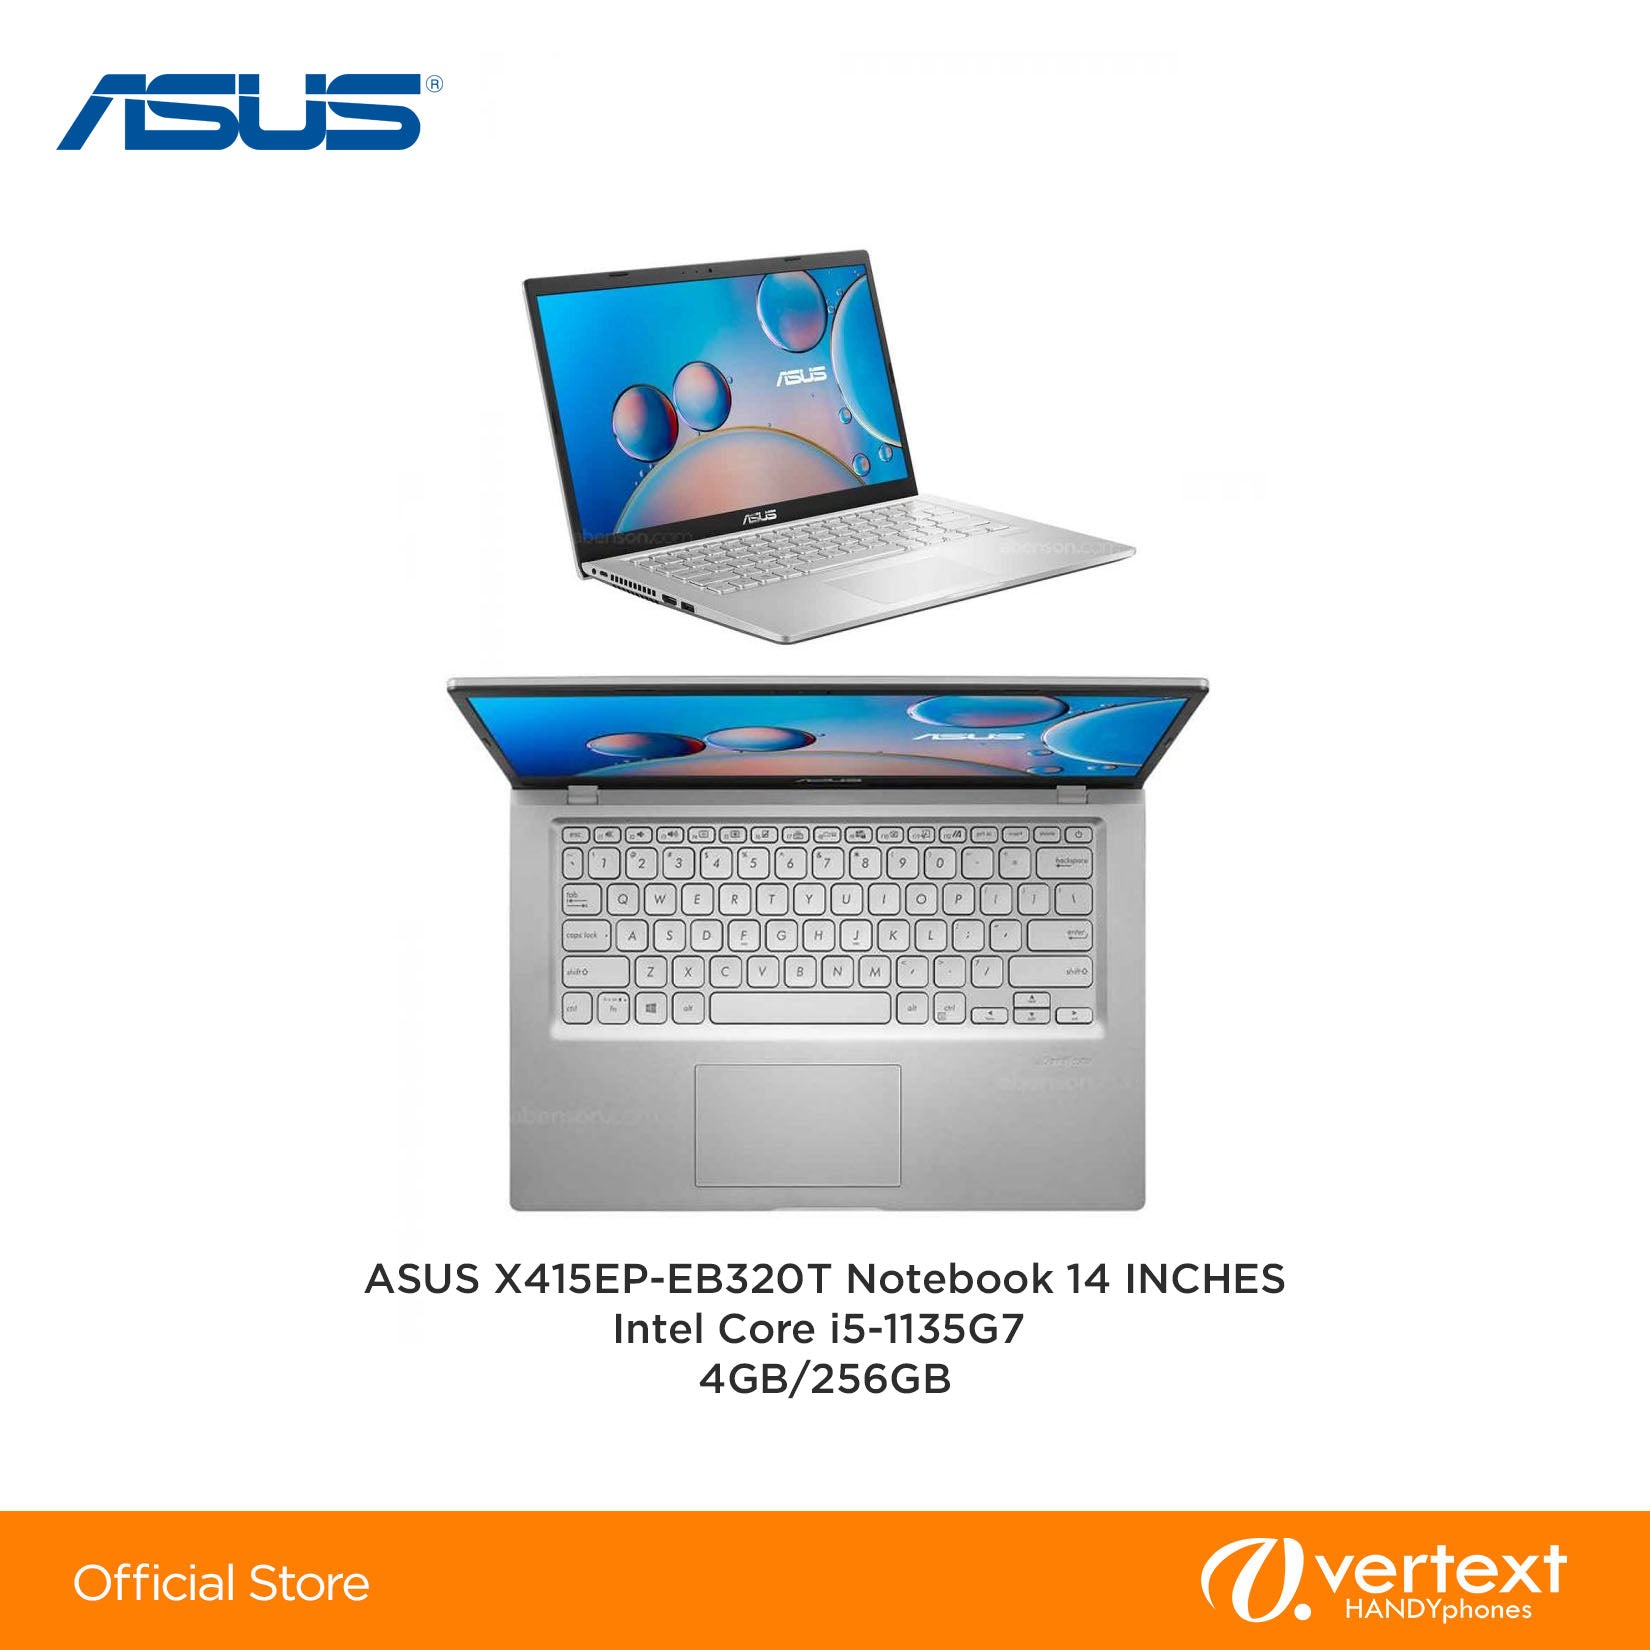 ASUS X415EP-EB320T Notebook 14 INCHES Intel Core i5-1135G7